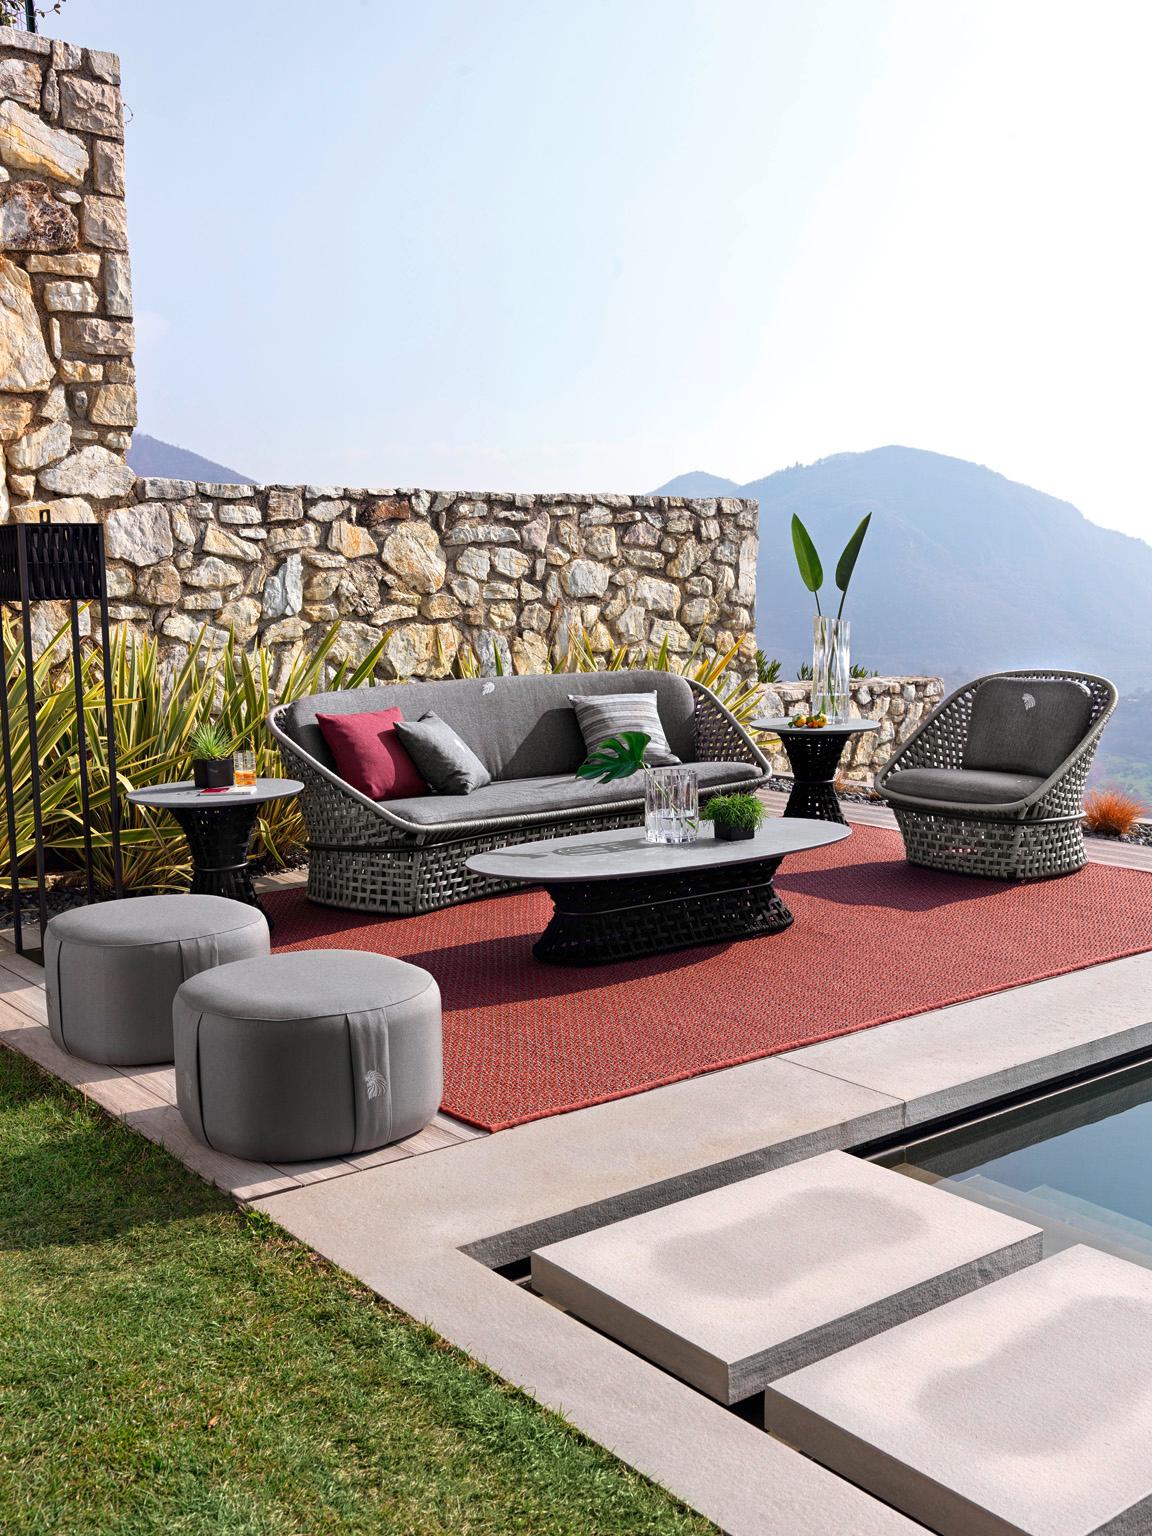 Dune Outdoor 3 seater sofa available in special treated fabric or first grade leather.
Cushion filling in waterproof dacron. Structure in combination of satined black
metal treated in cataphoresis with inserted Giorgio Collection logo and black